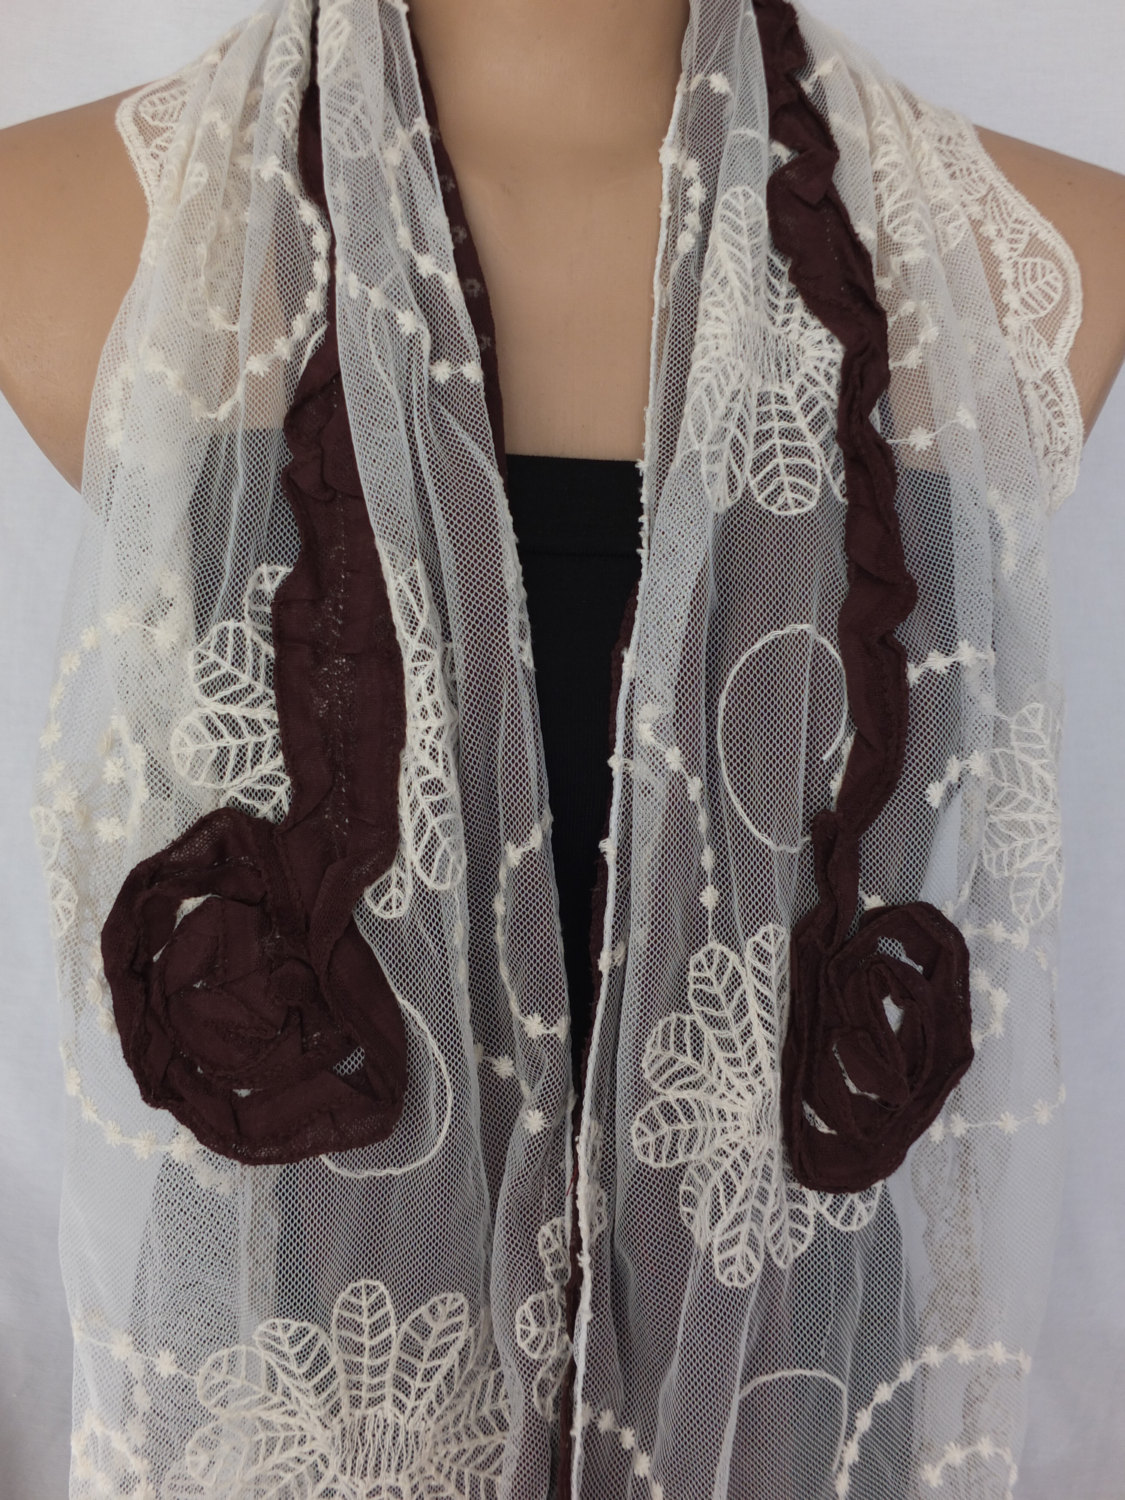 Rose Scarf Shawl, Tulle And Cotton Scarf, Brown And Cream Shawl, Long Scarf Shawl, Lace Cowl, Gift For Her